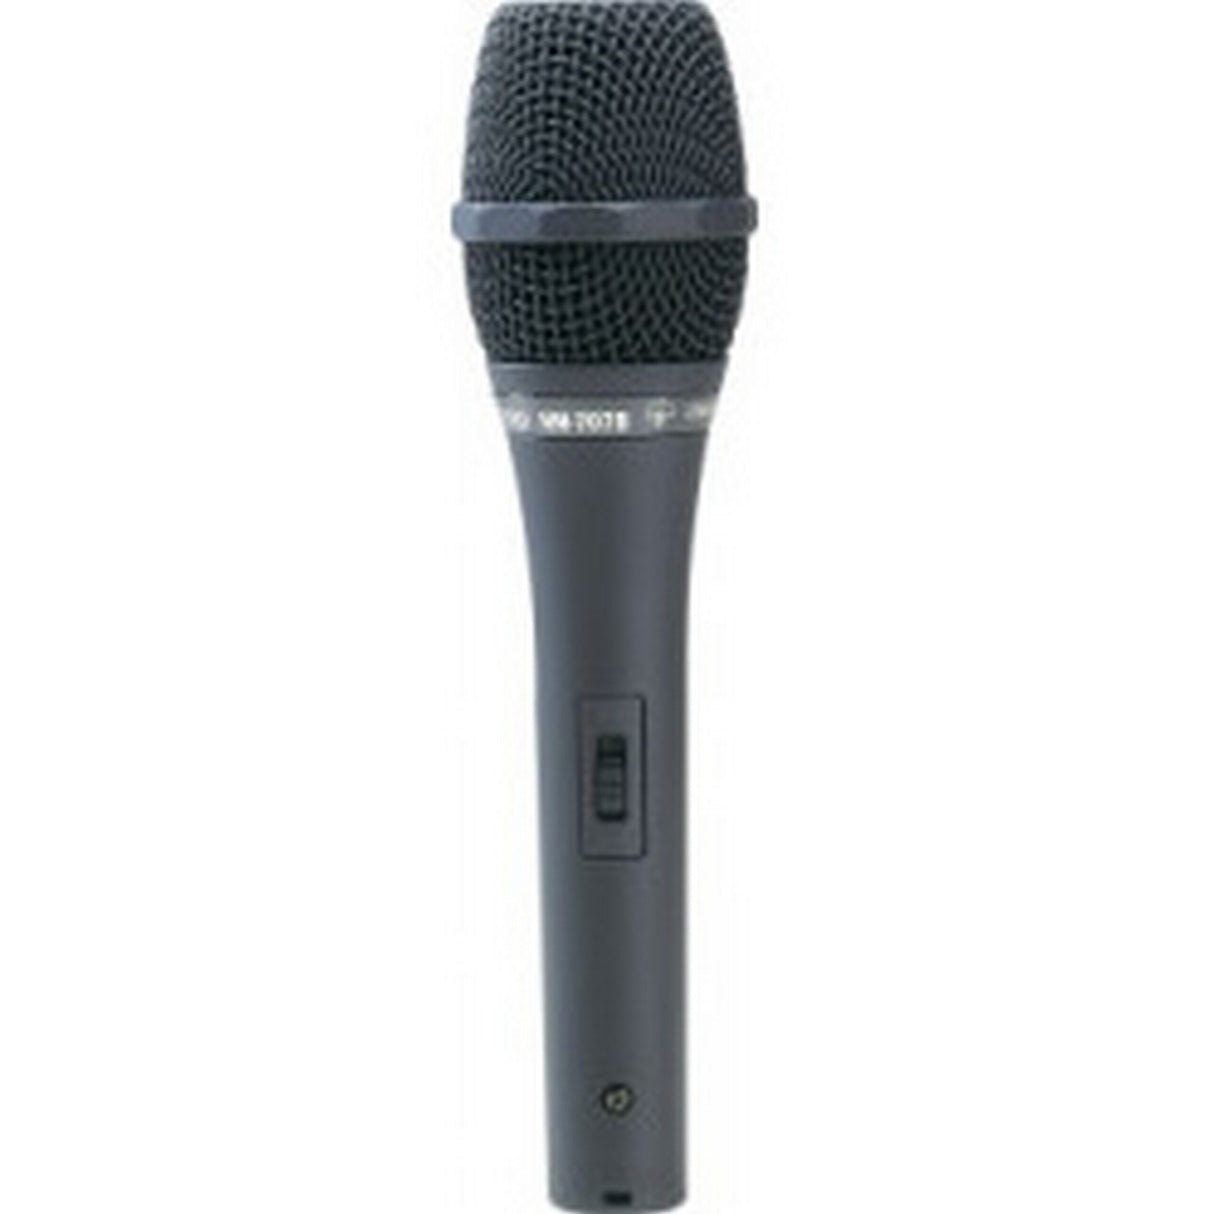 MIPRO MM-707C/B Cardioid Microphone, Battery Powered